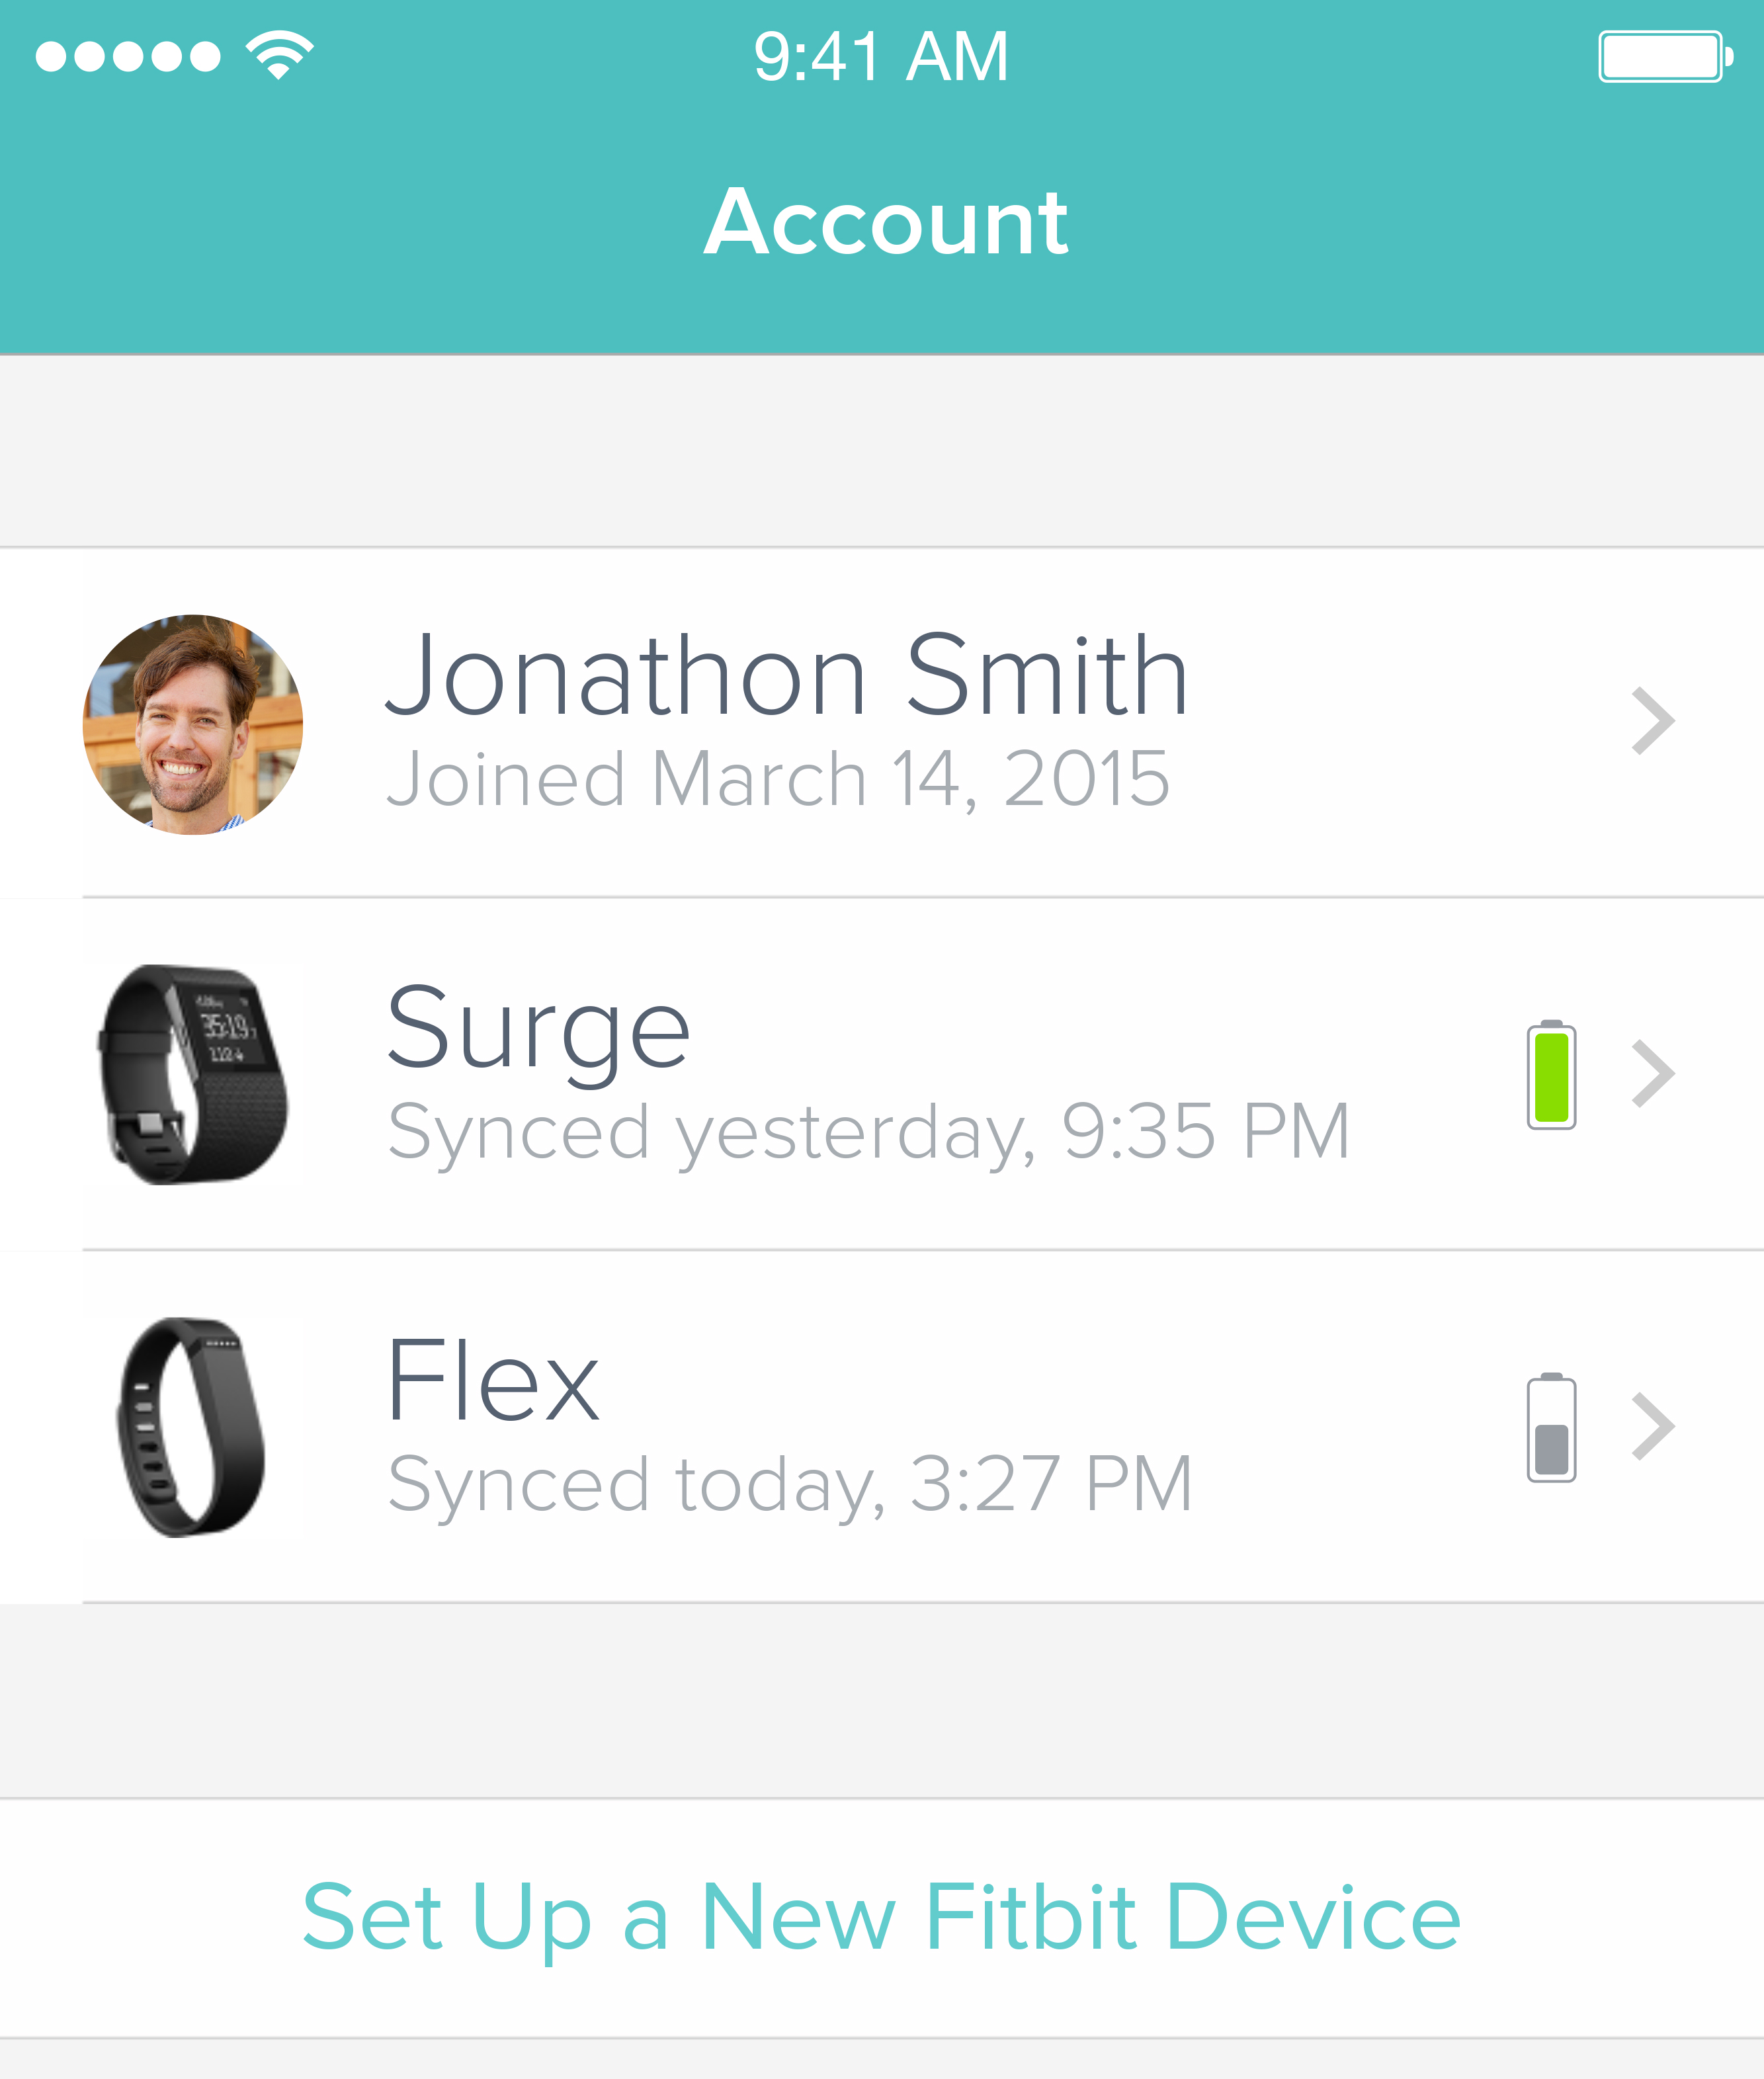 You can now use multiple Fitbit devices with one account!